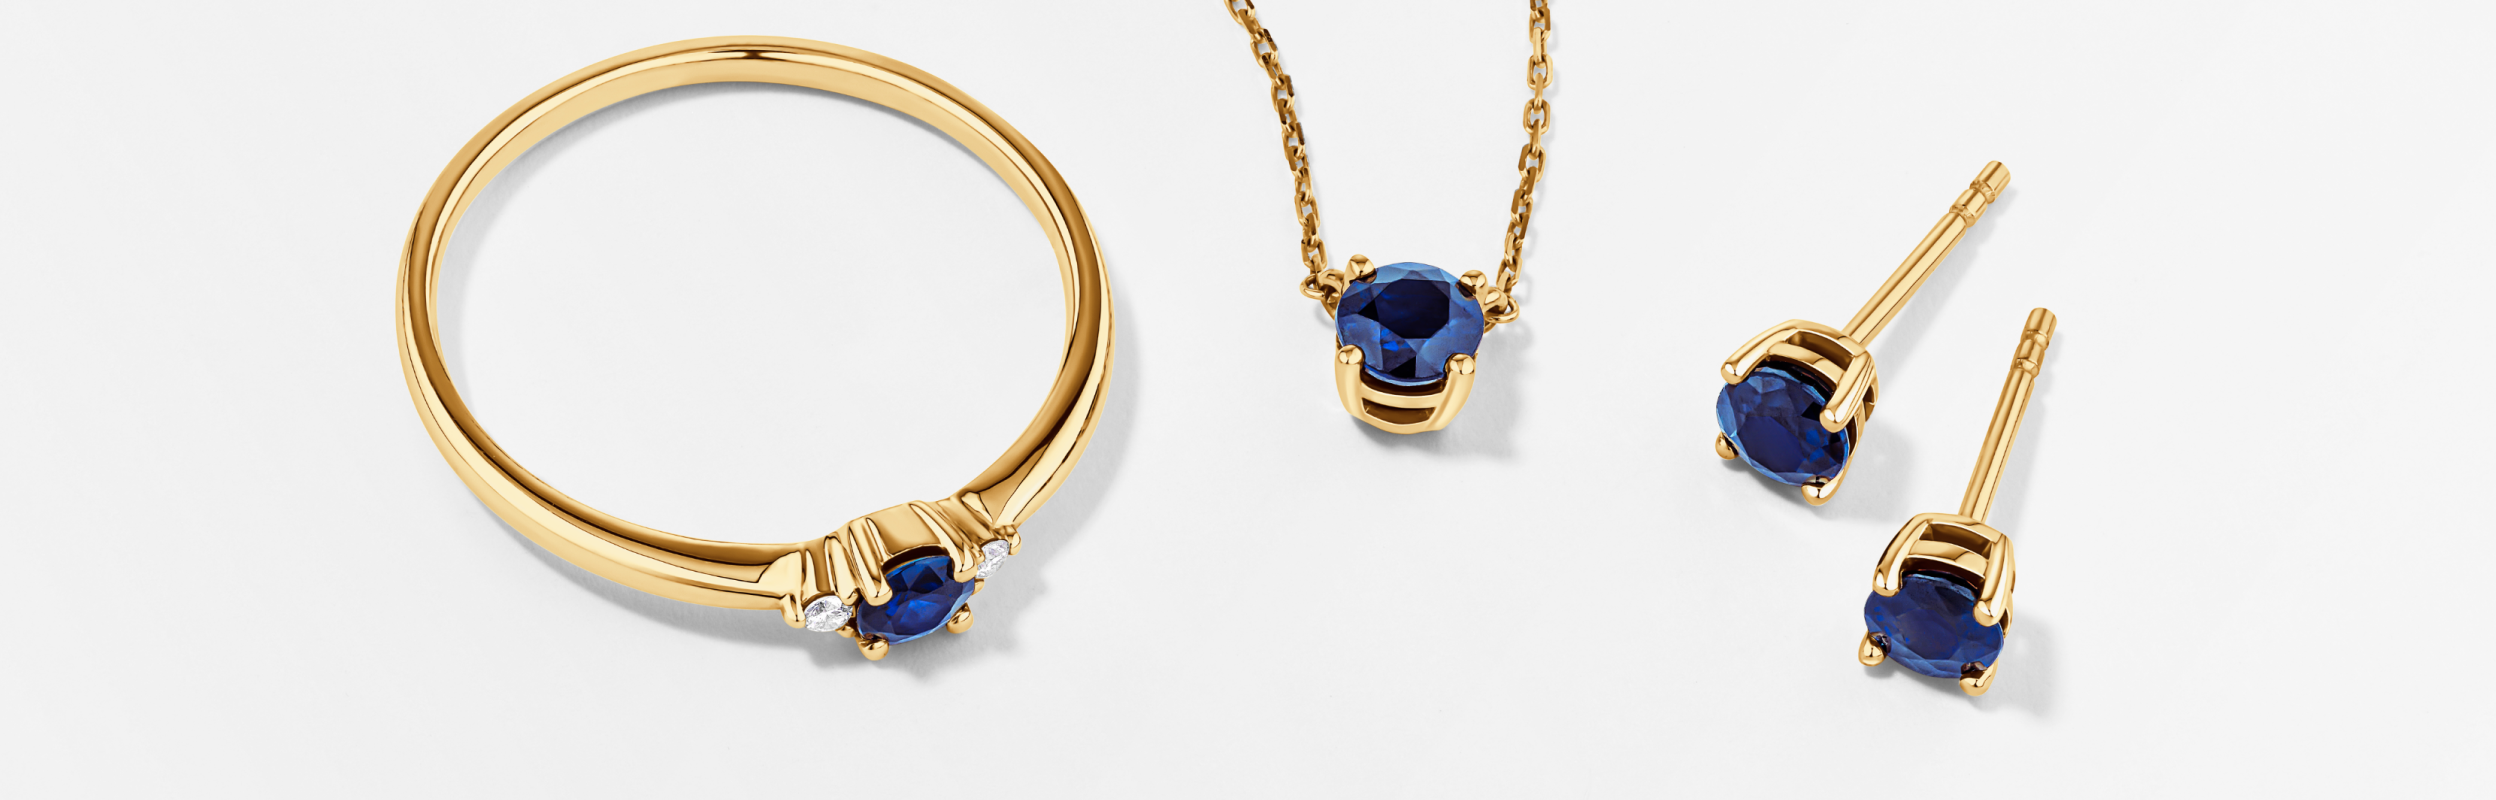 blue stone jewellery, ring, necklace and earrings in yellow gold